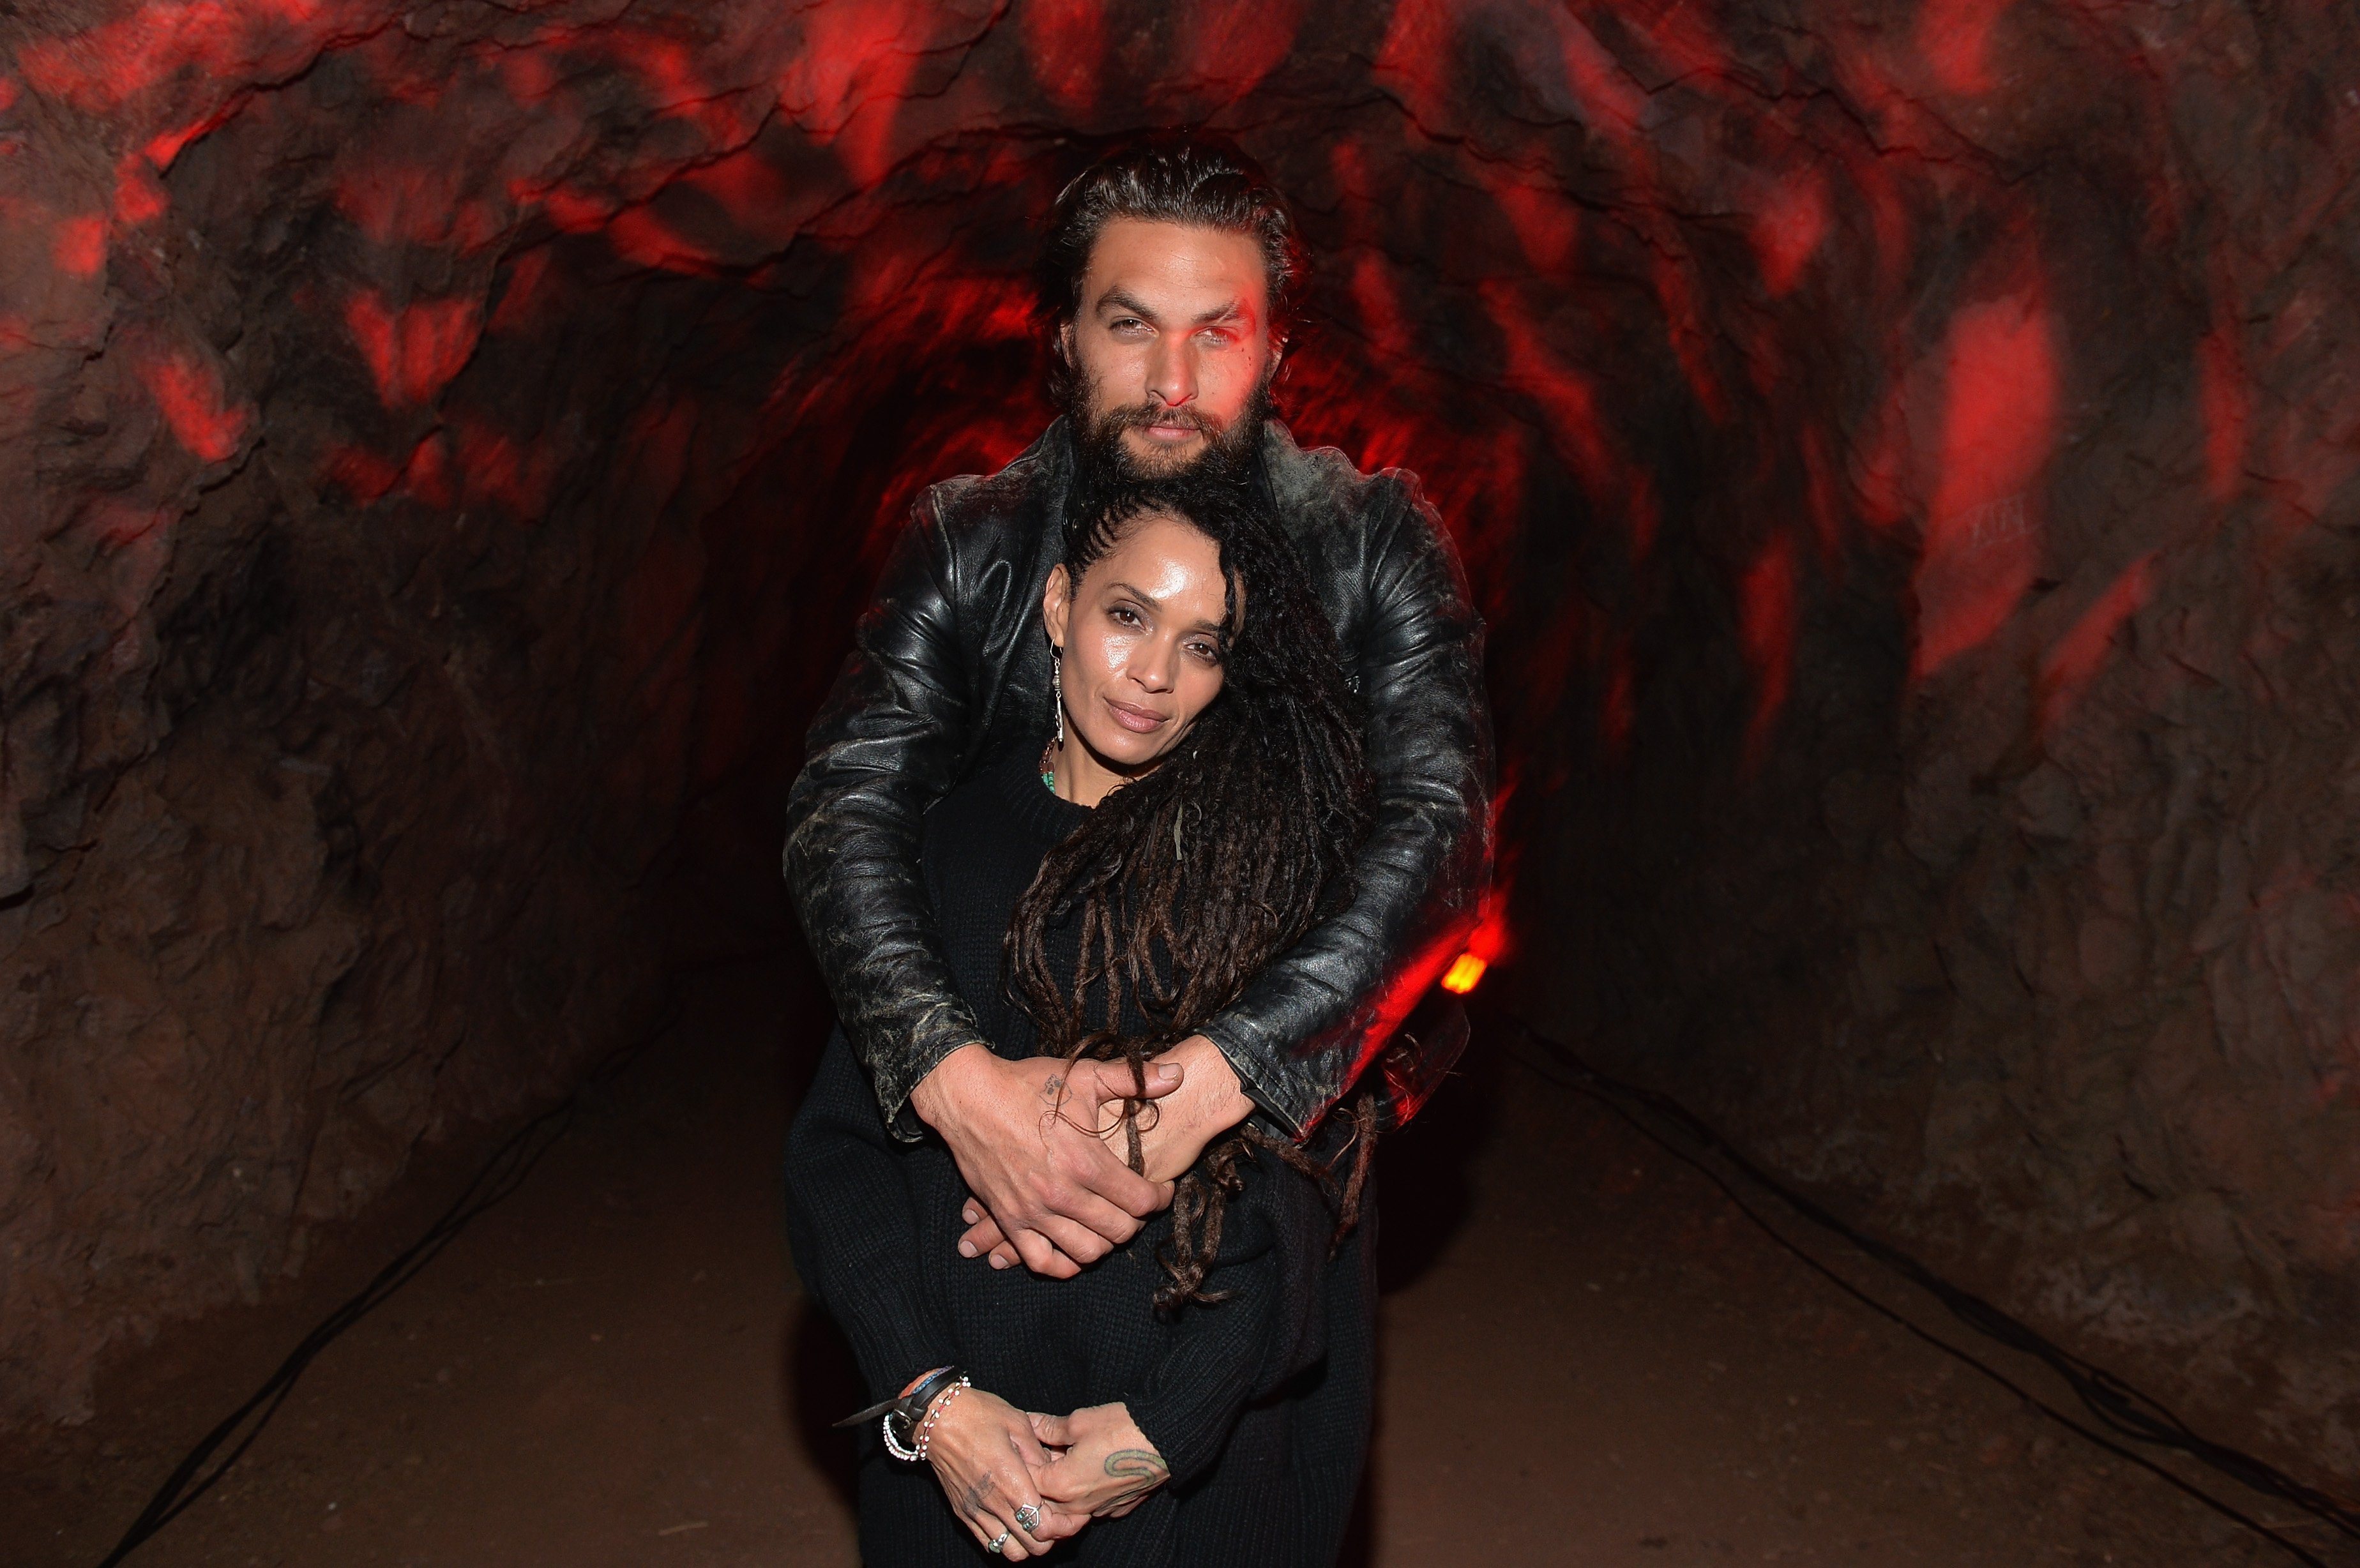 Lisa Bonet and Jason Momoa attend a screening of "The Red Road" at The Bronson Caves at Griffith Park on February 24, 2014 in Los Angeles, California. | Source: Getty Images